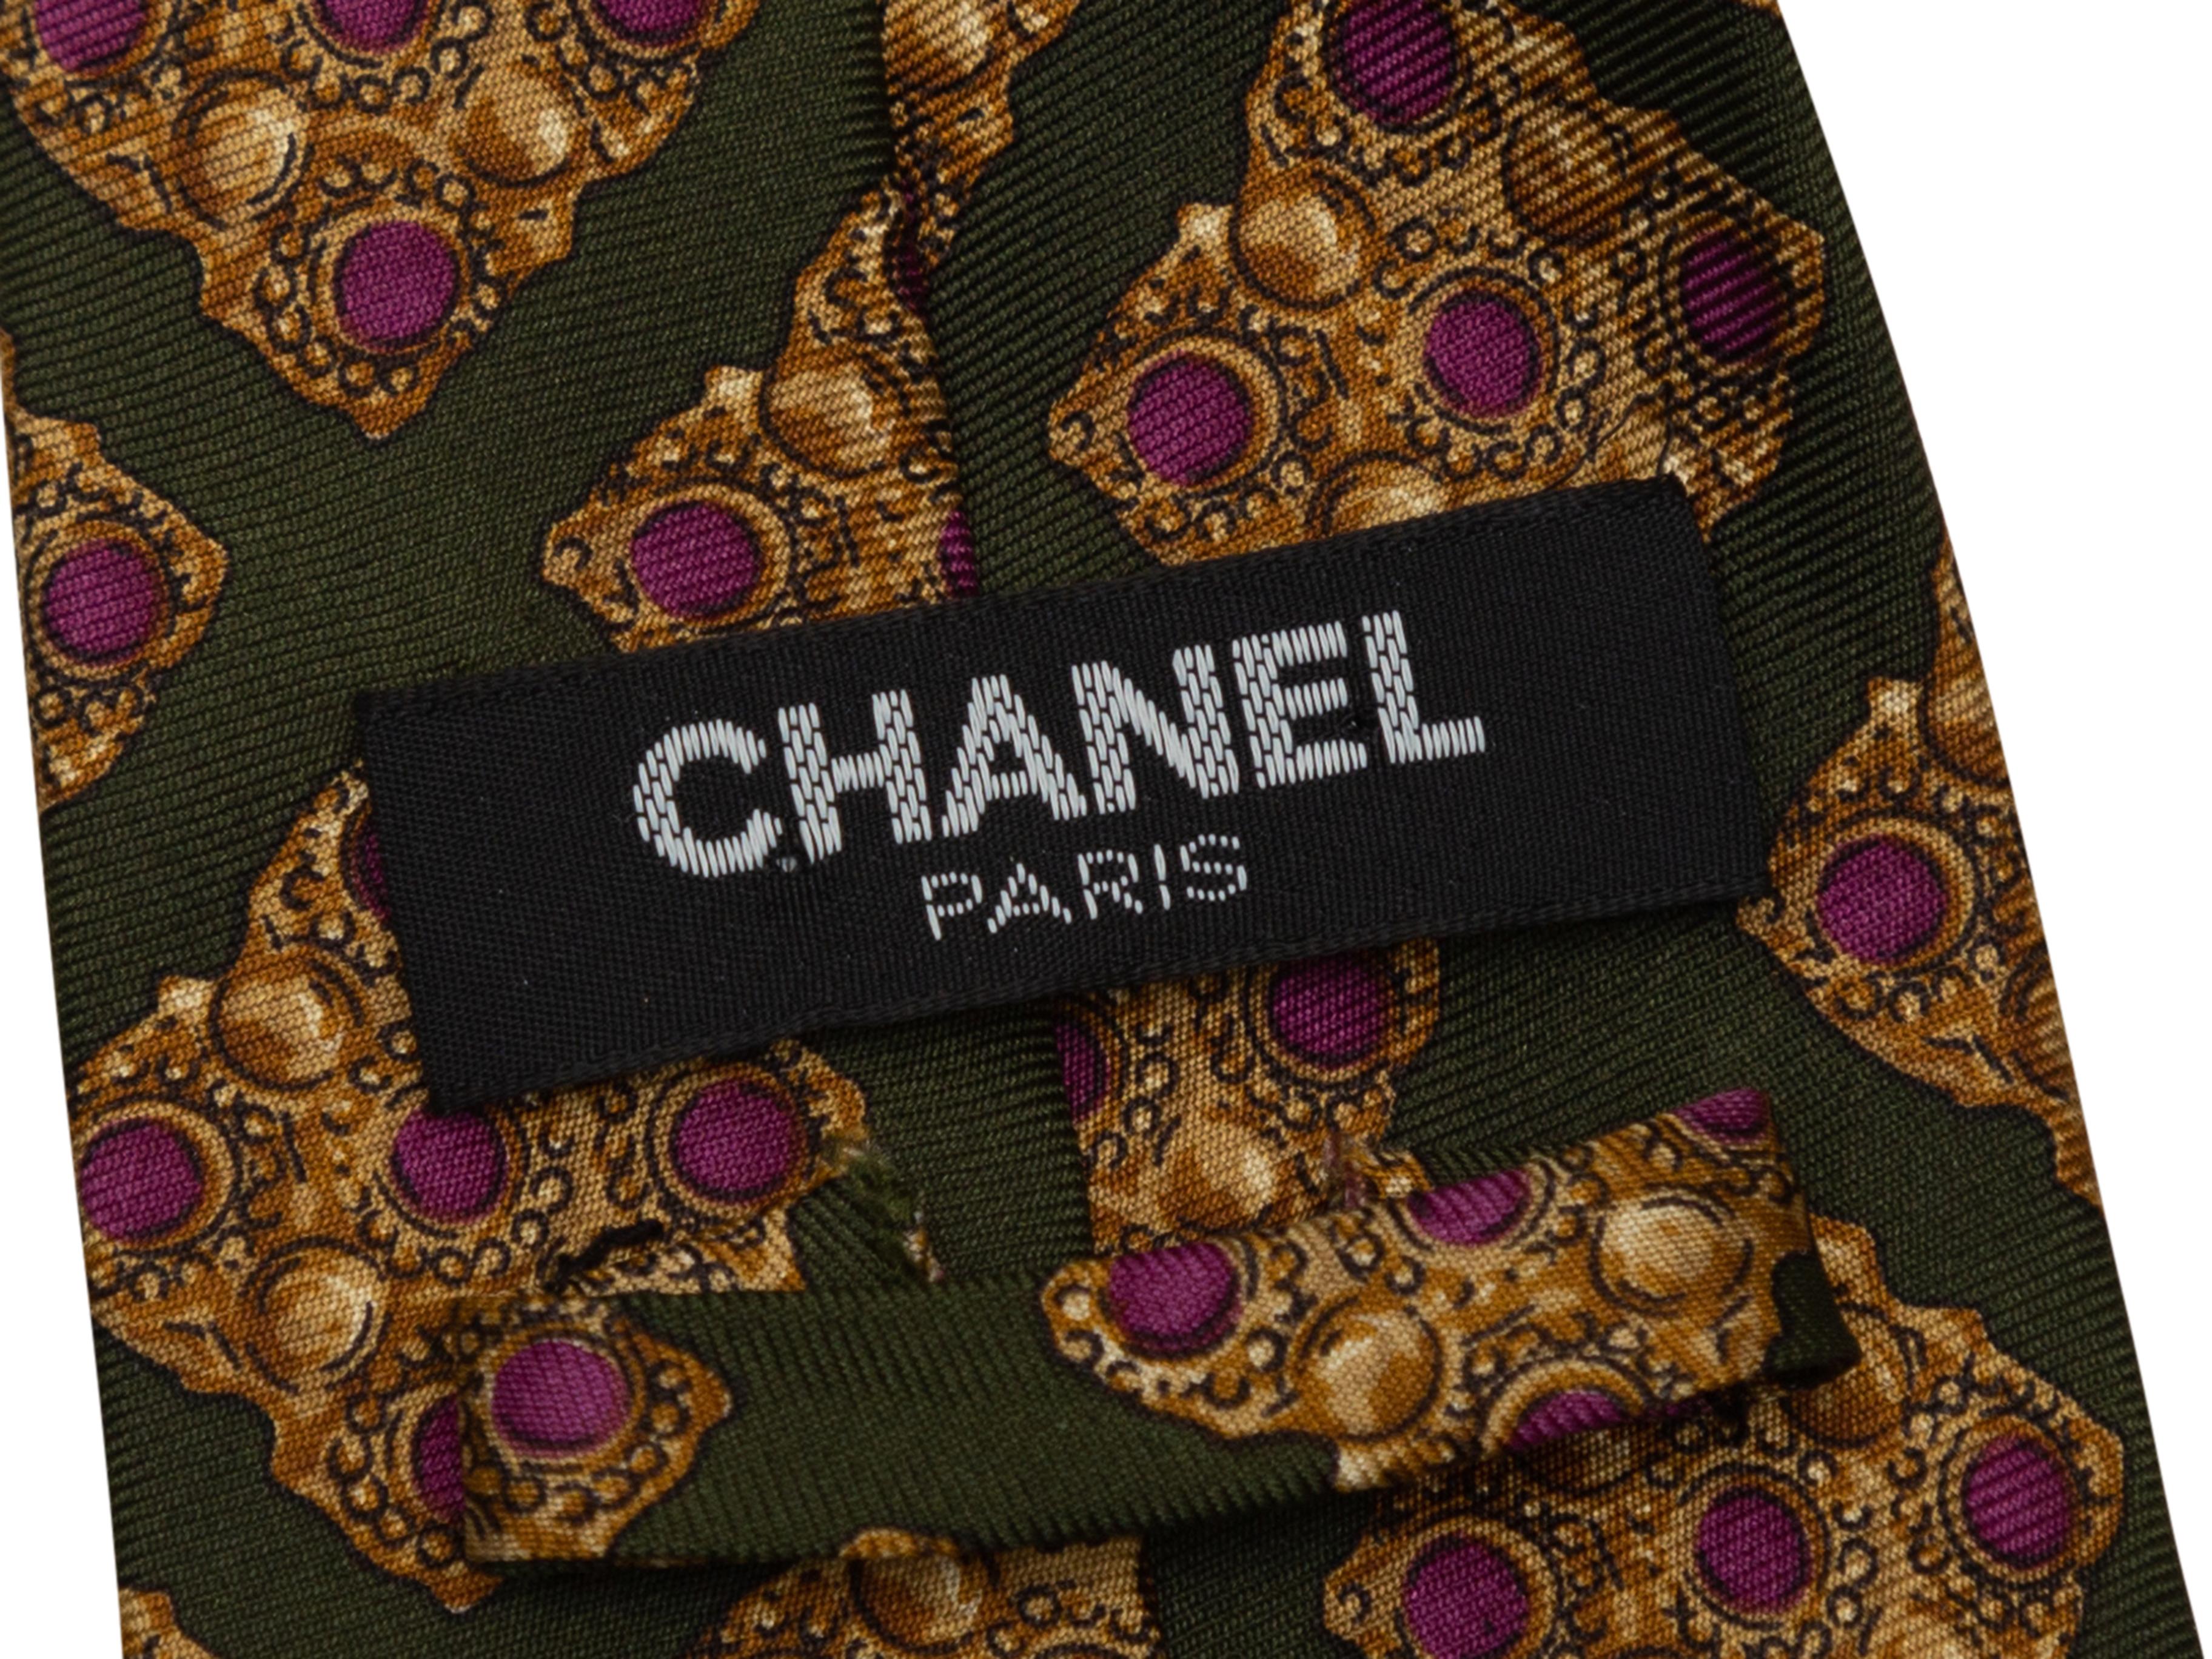 Product Details: Olive green, gold and burgundy printed tie by Chanel. 57